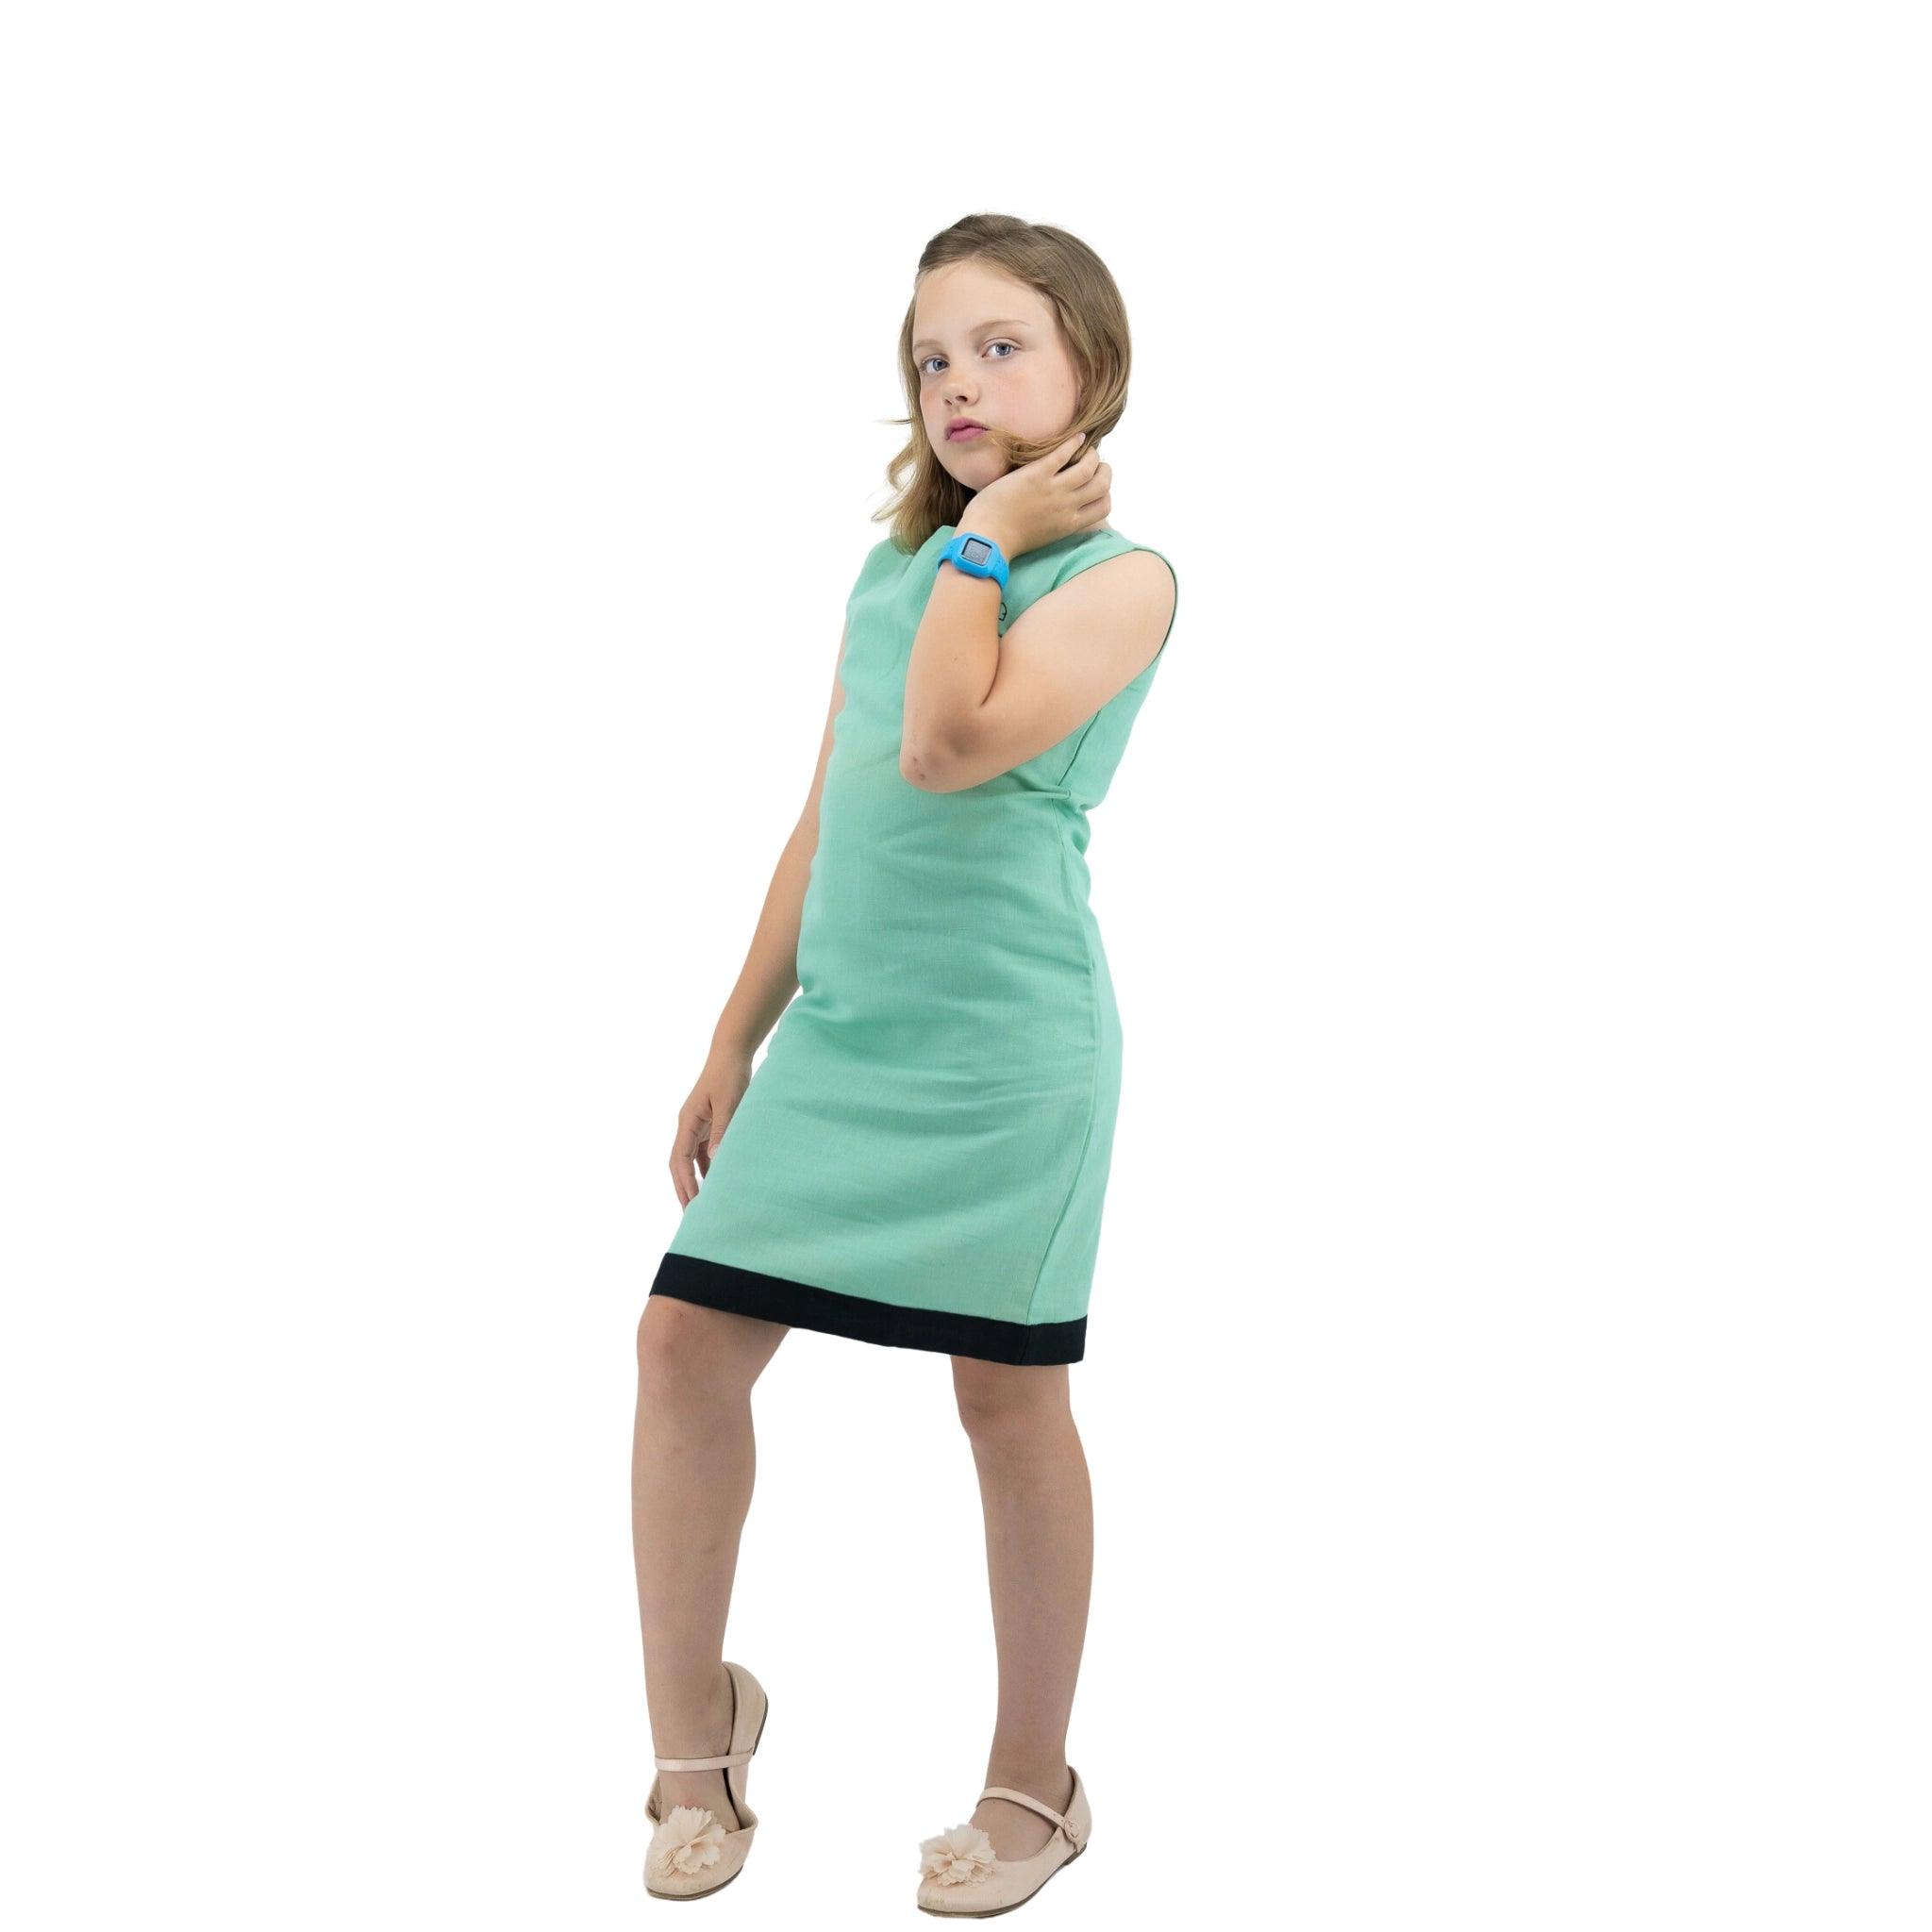 A young girl standing in a thoughtful pose, wearing a Karee Linen Cotton Round Neck Frock for Kids in Neptune Green with a black hemline and light-colored flats, isolated on a white background.